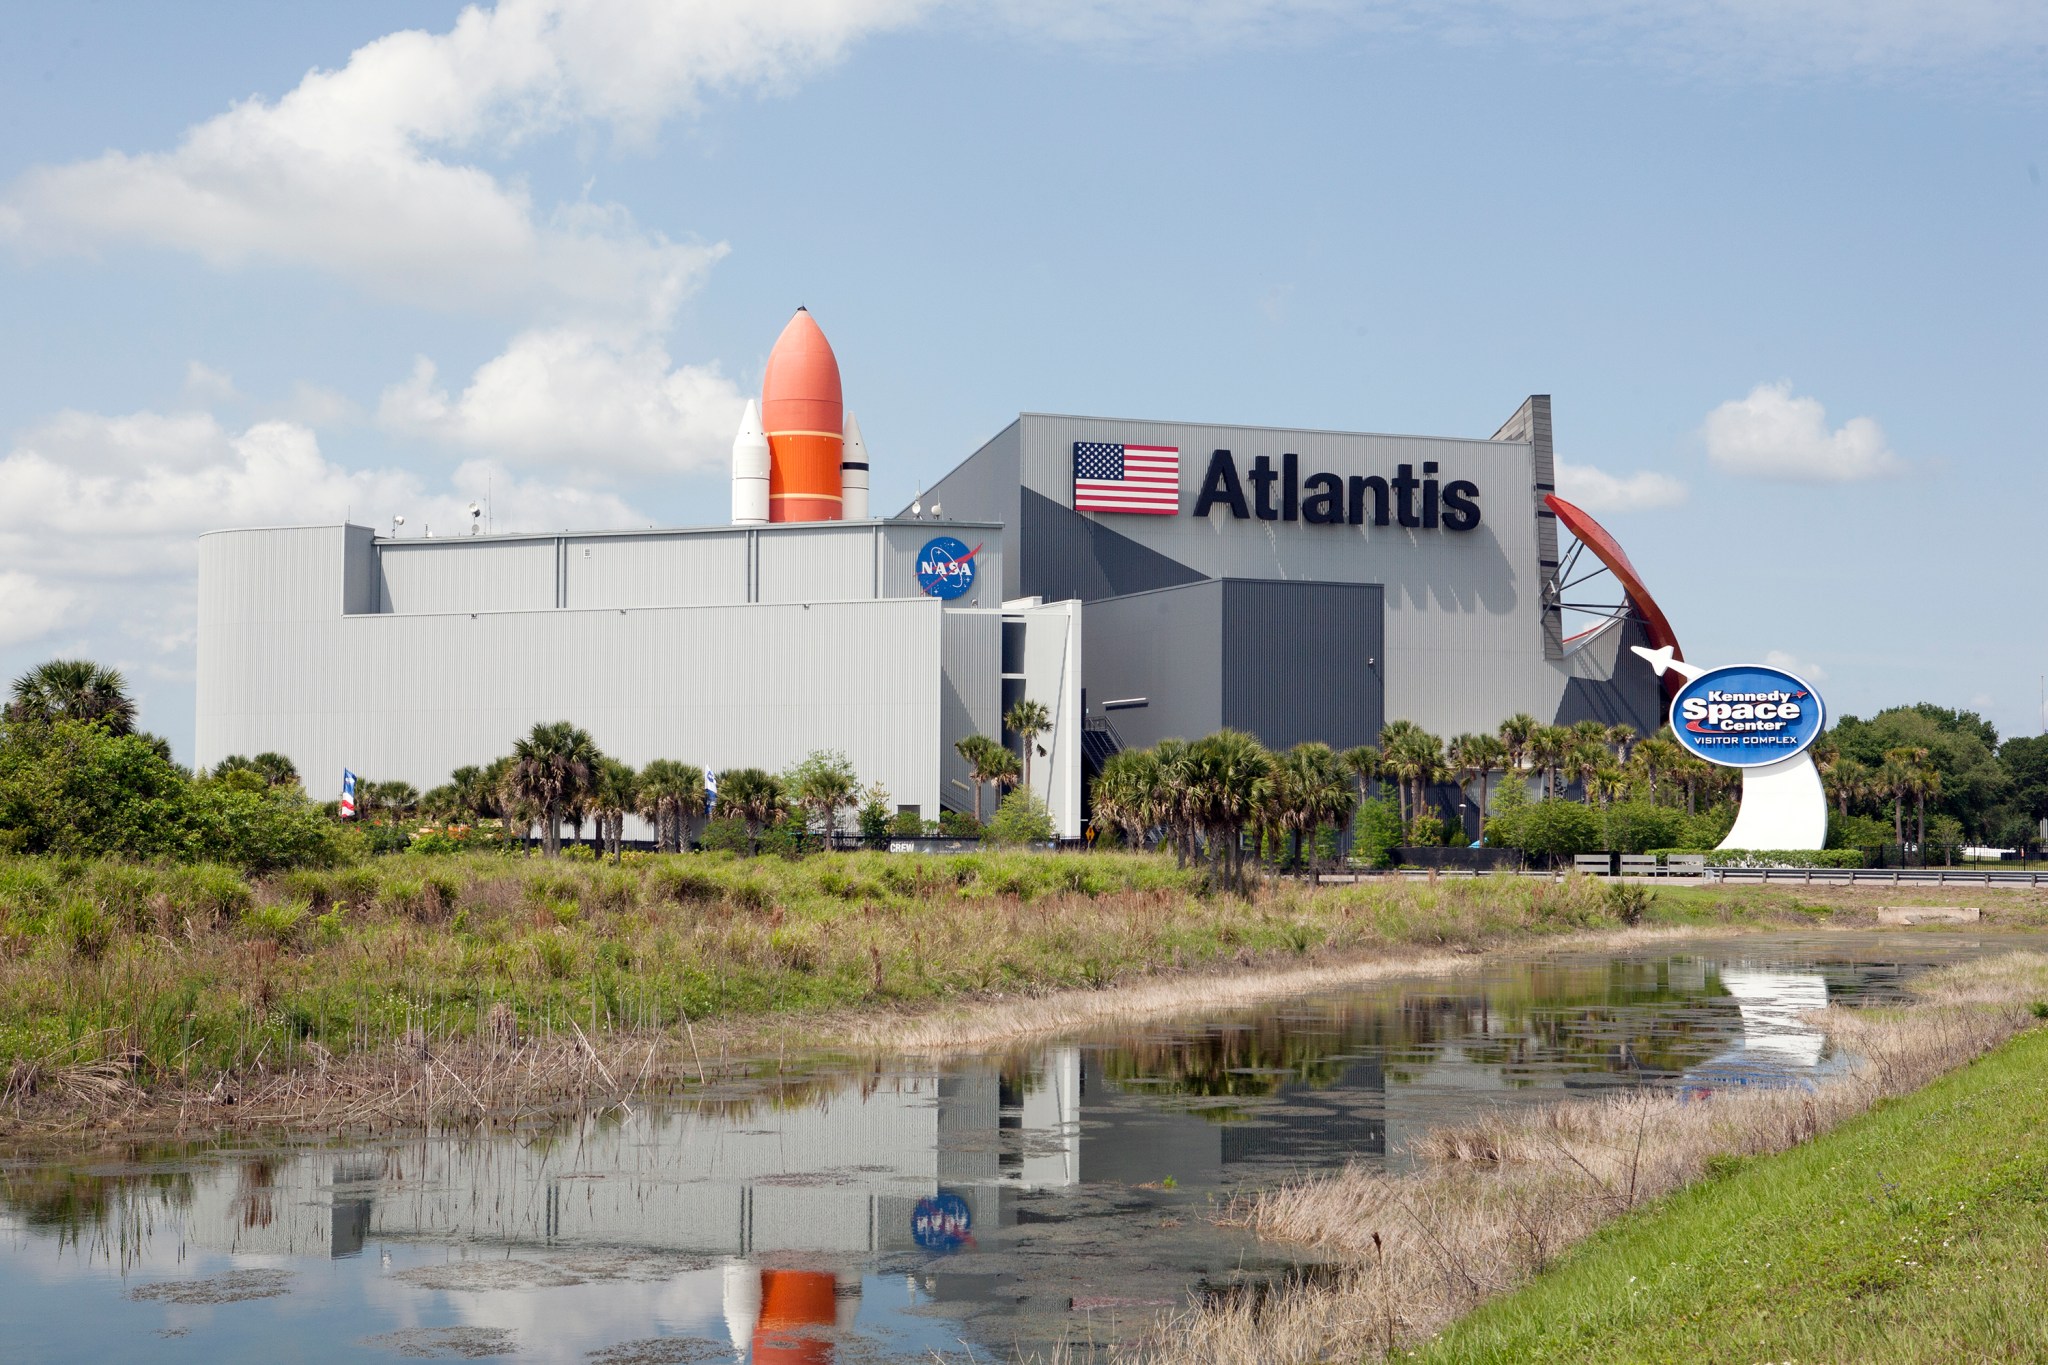 The Space Shuttle Atlantis Building at the Kennedy Space Center Visitor Complex in Florida.